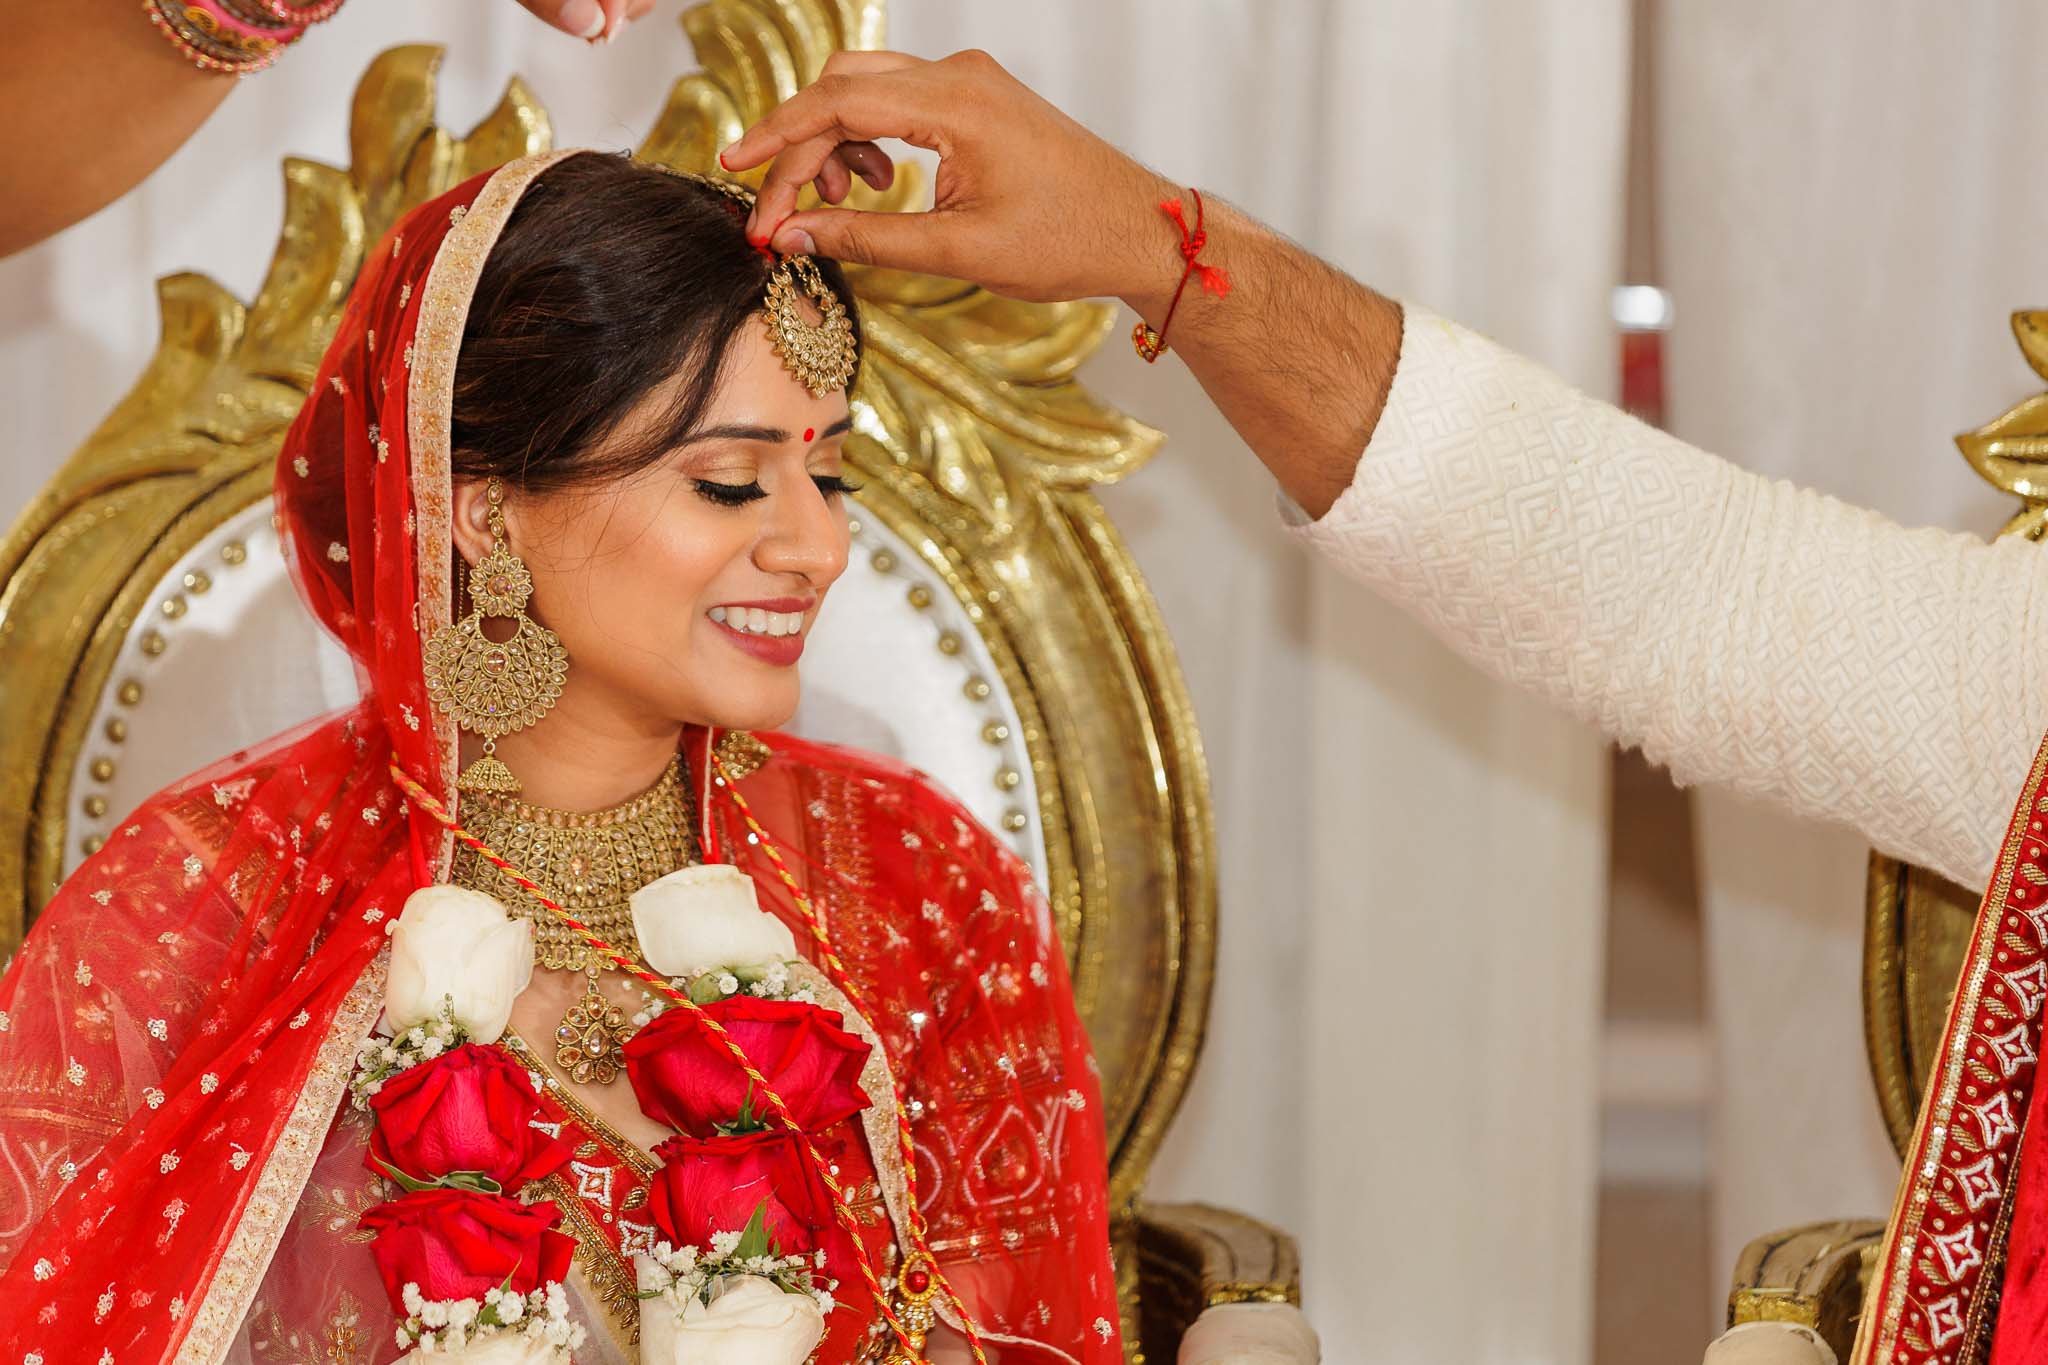  Indian bride adorned with Sindur, a red powder that symbolizes her marriage status 